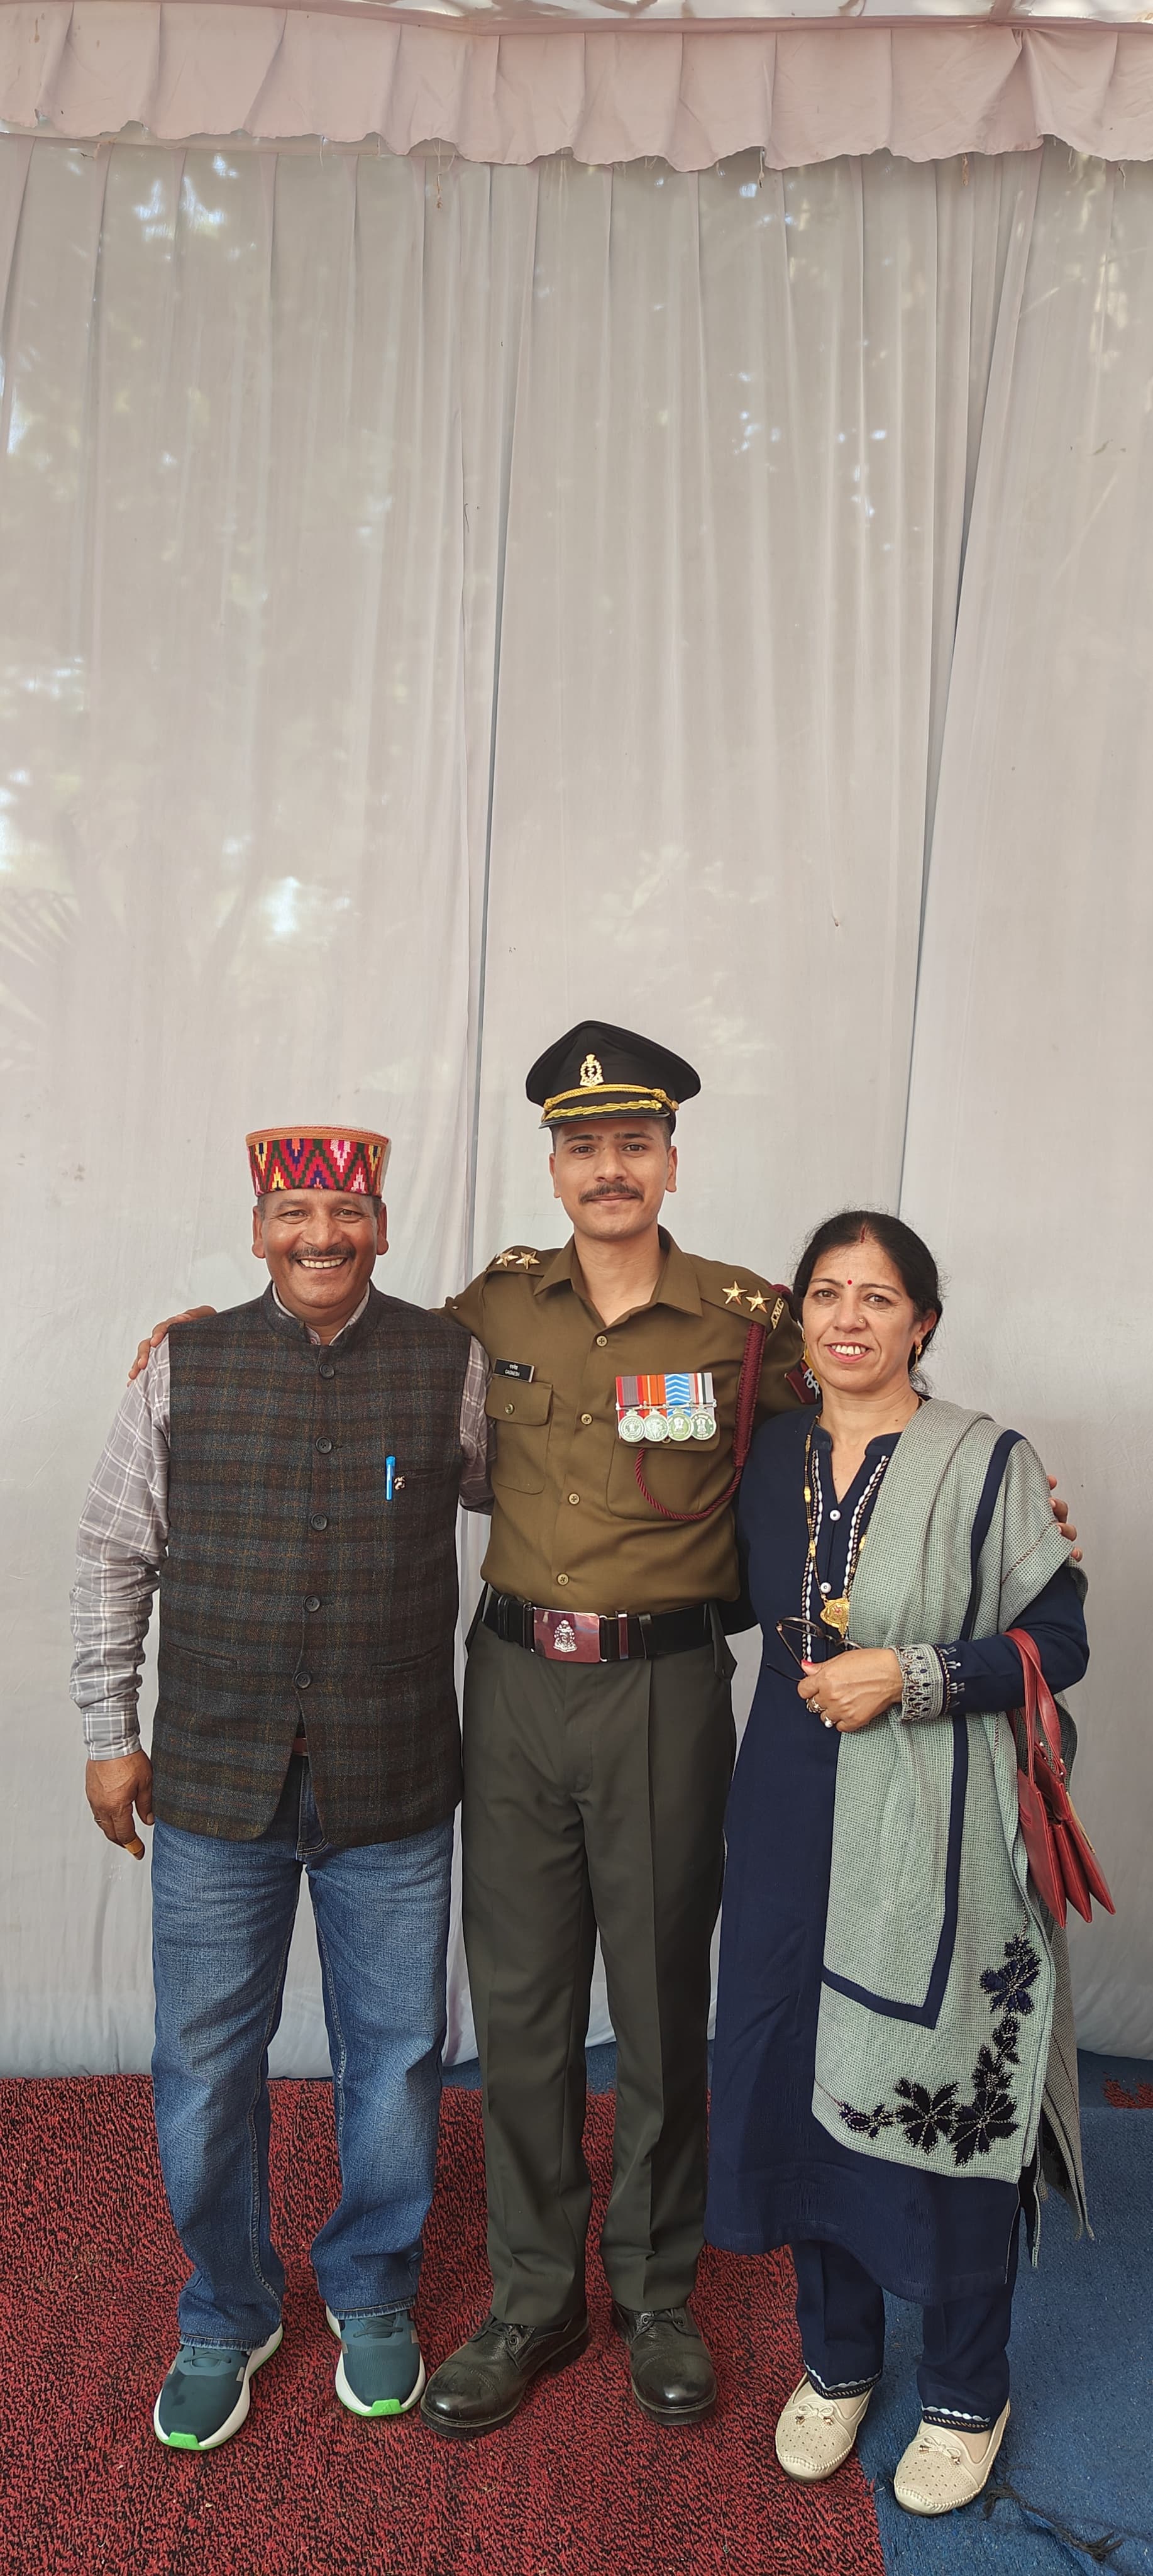 Gagnesh Kumar became lieutenant in army